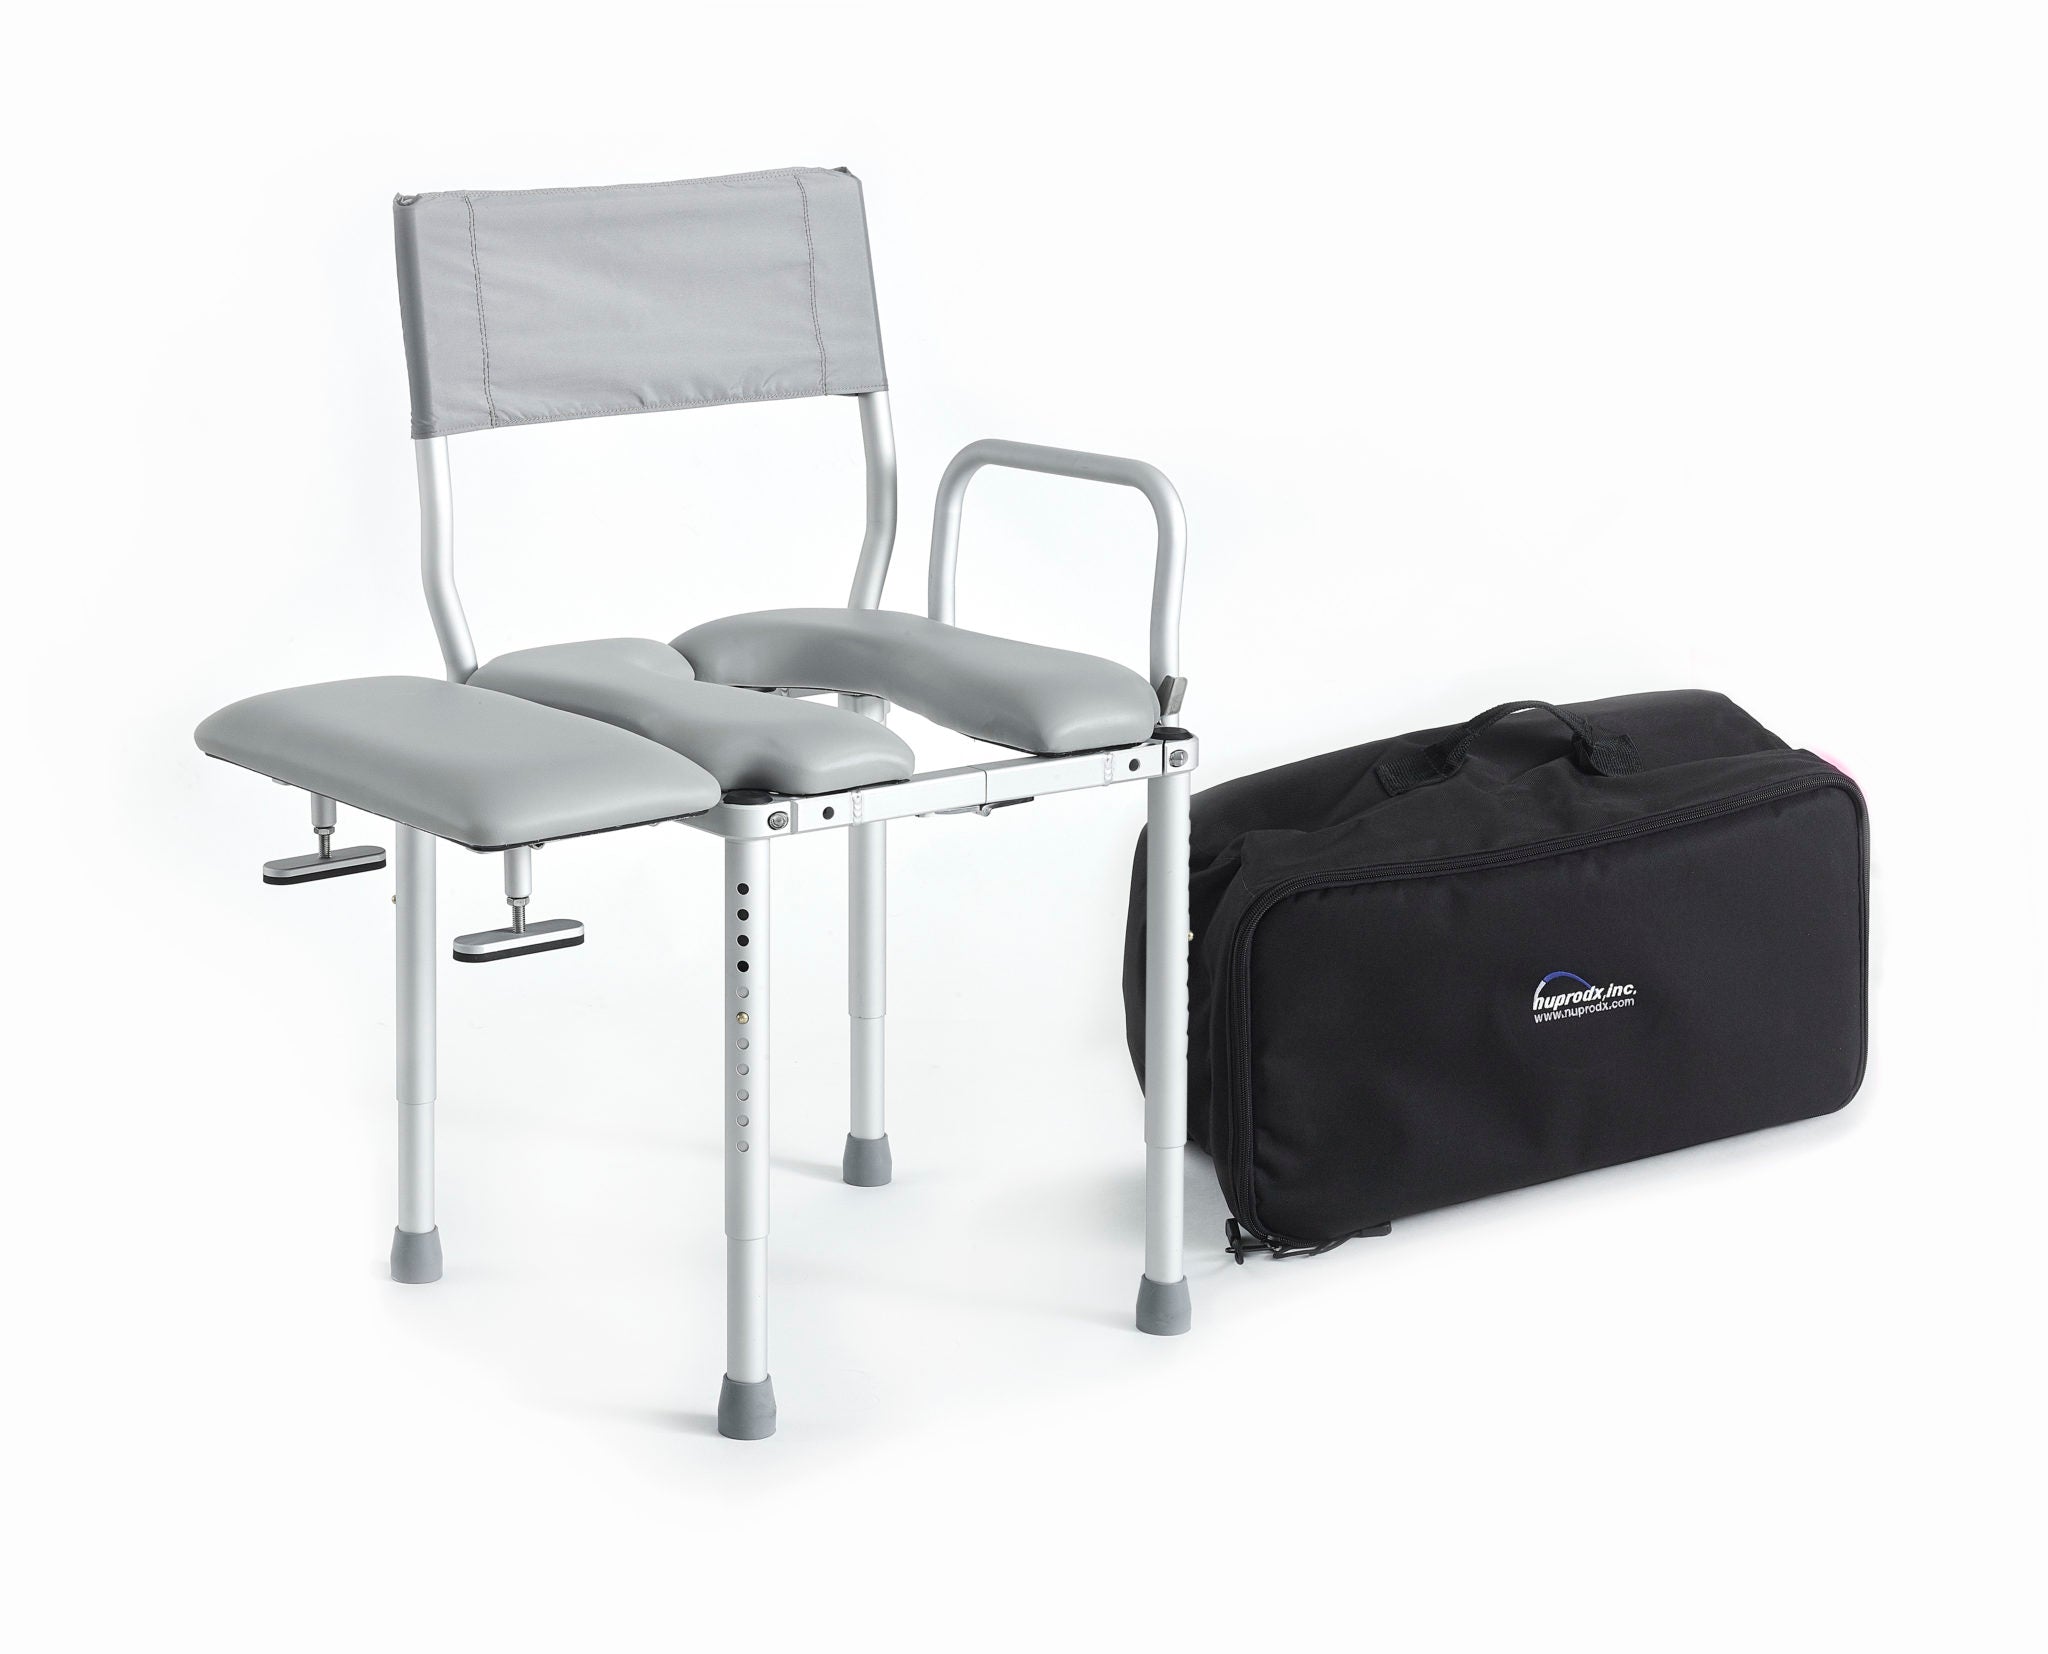 Nuprodx multichair 3000TX | Travel Shower Commode Chair